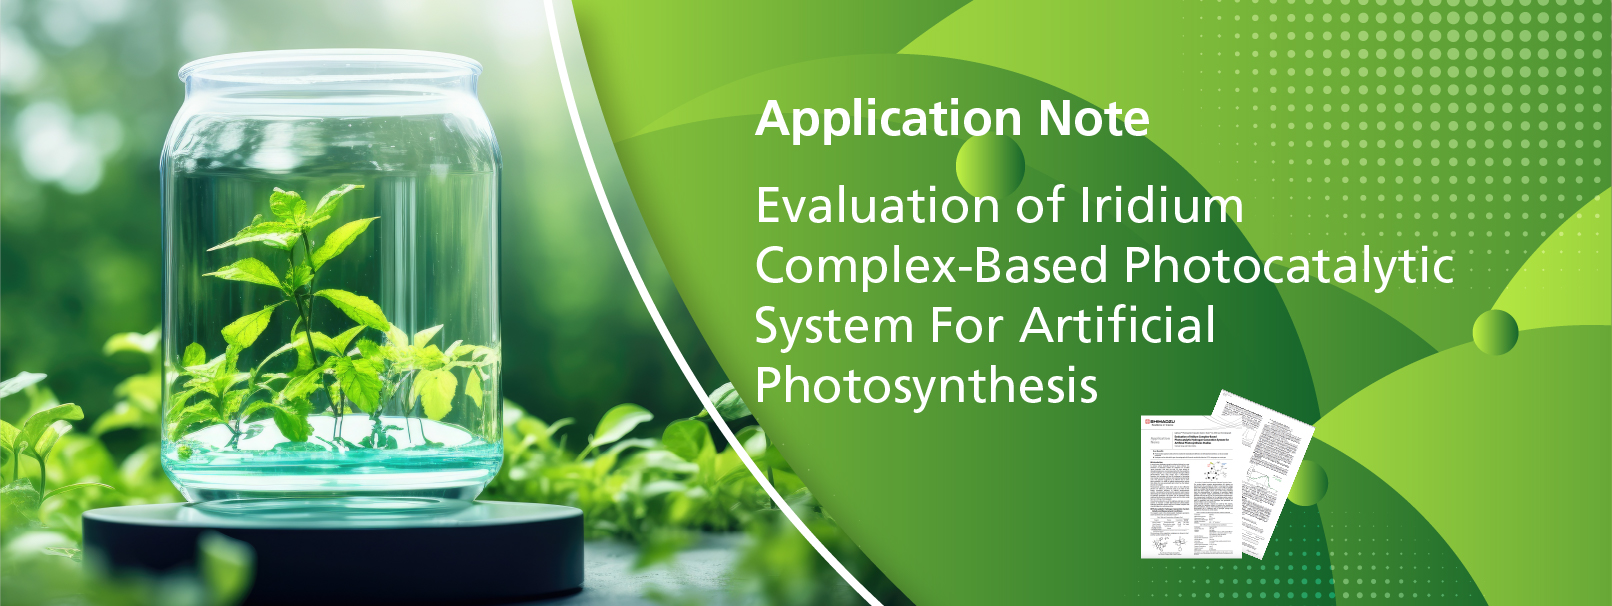 Evaluation of Iridium Complex-Based Photocatalytic System For Artificial Photosynthesis 